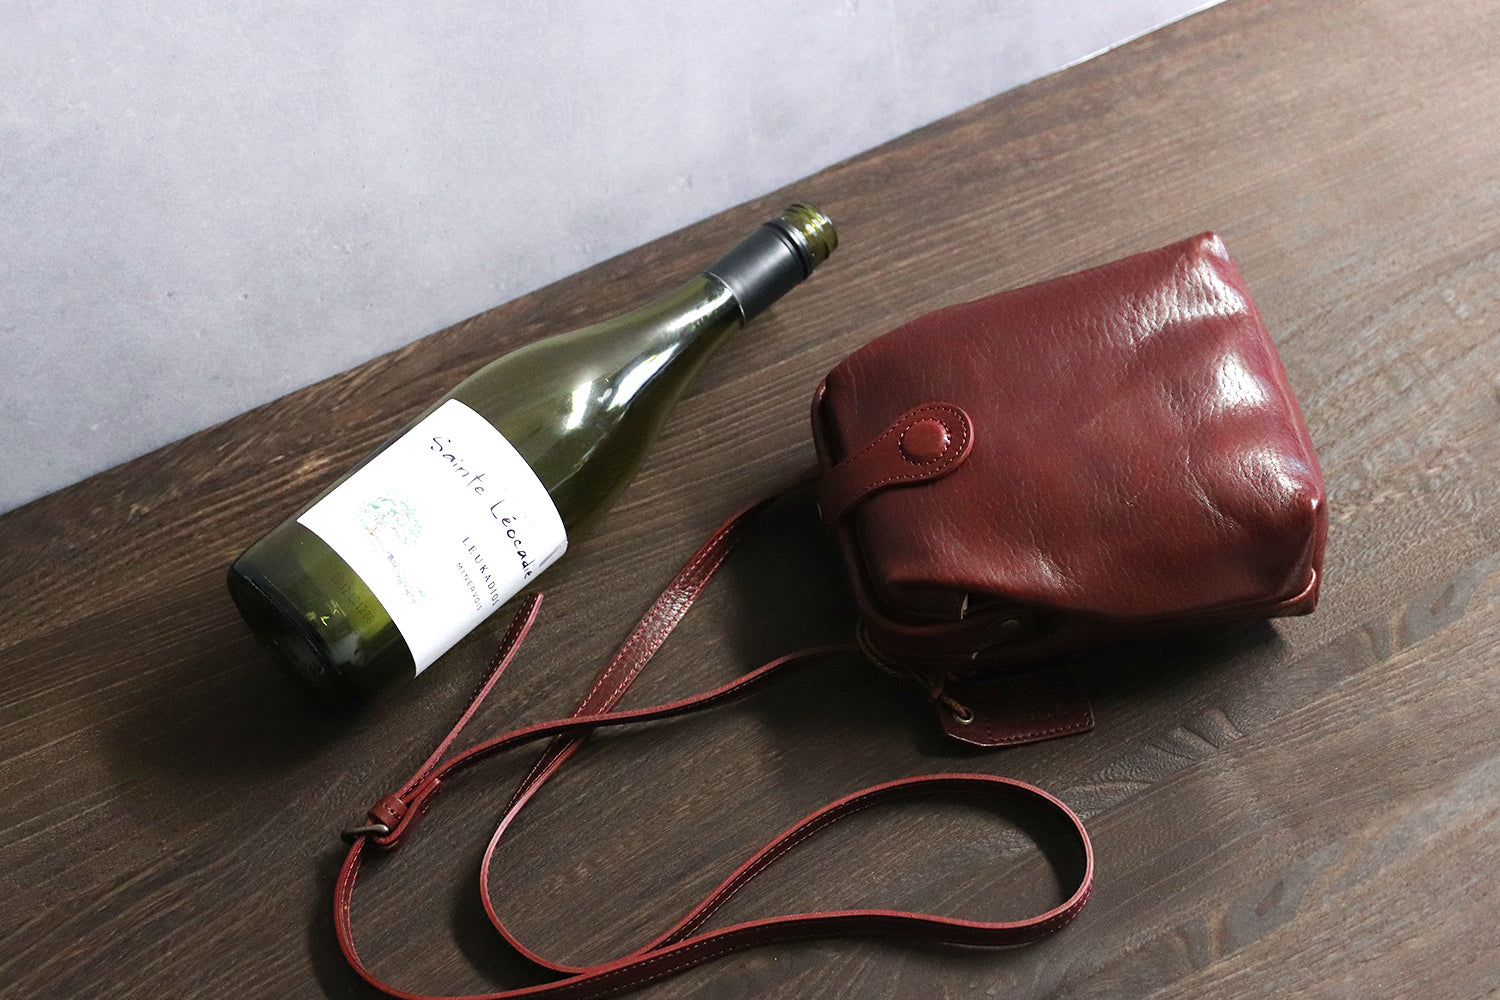 Atelier nuu / Lezza botanica vino Dulles pochette made of sustainable leather dyed with wine residue 